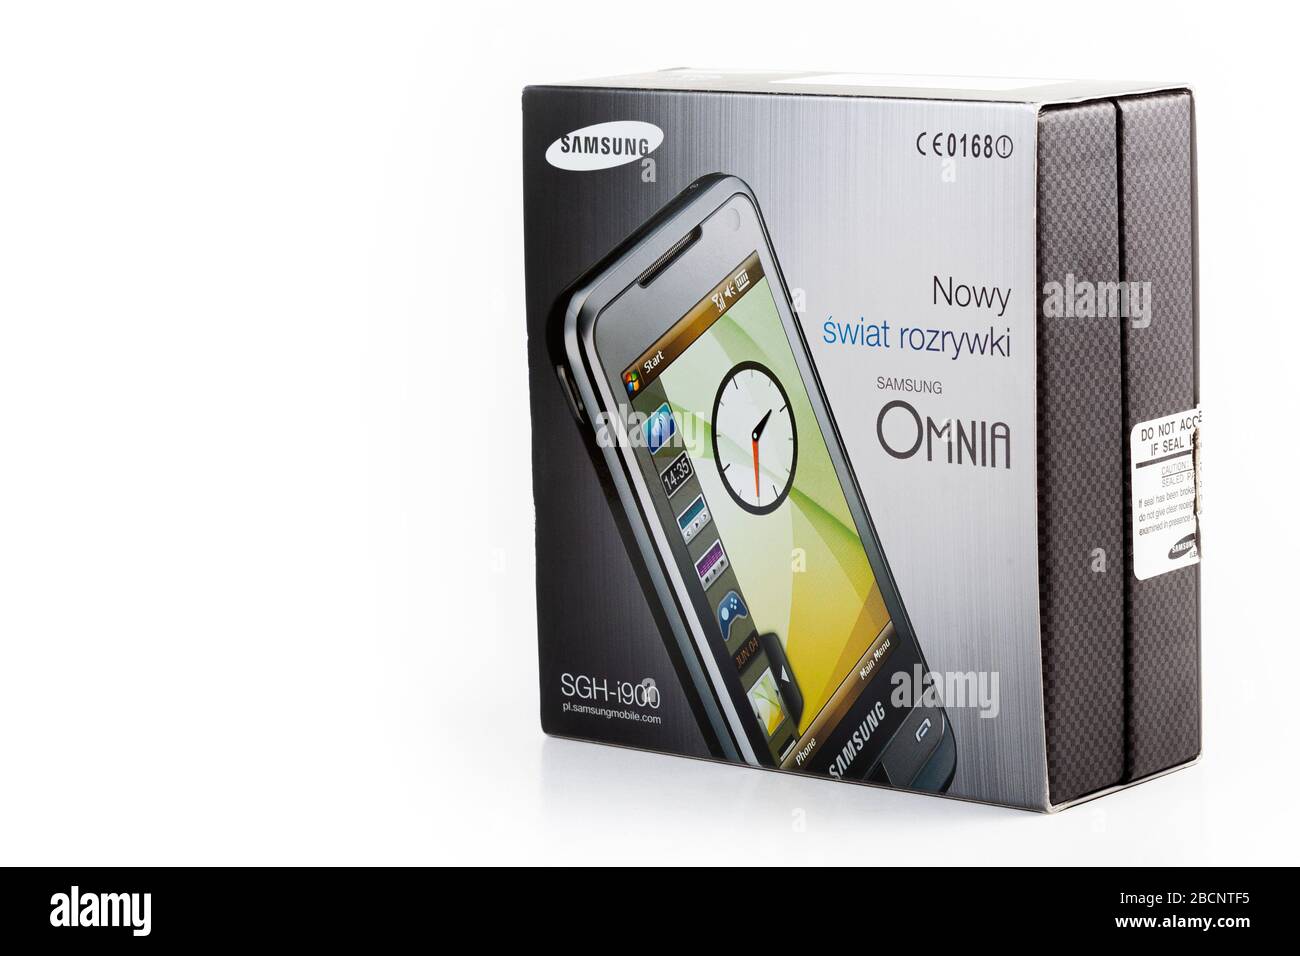 Samsung Omnia Sgh I900 Old Touch Screen Mobile Phone Windows Mobile 6 Smartphone Product Shot Isolated Original Polish Product Box From 08 09 Stock Photo Alamy